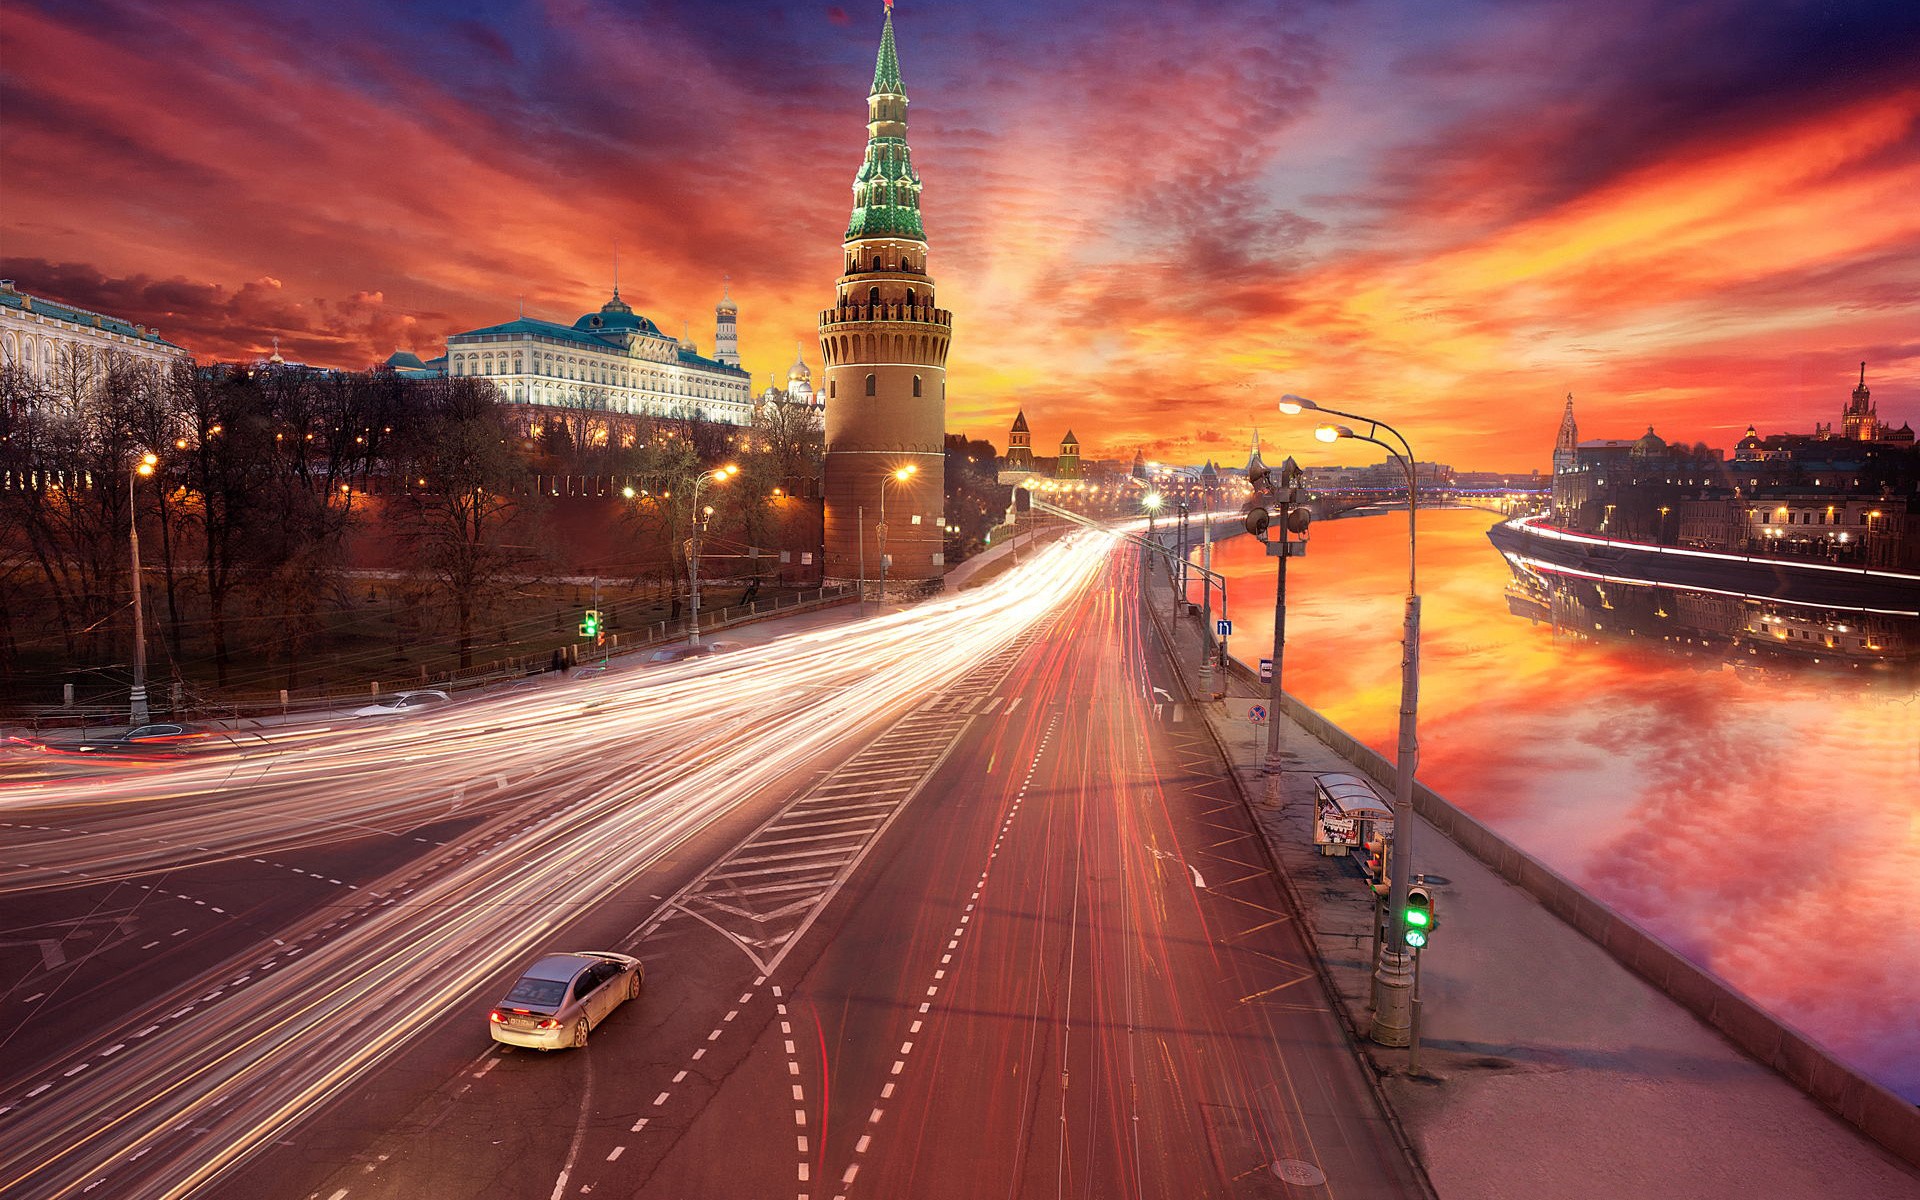 city, Cityscape, Architecture, Capital, Moscow, Russia, Clouds, Sunset, Building, Town Square, Street, Lights, Car, Road, Light Trails, Long Exposure, River, Reflection, Traffic Lights, Kremlin, Old Building Wallpaper